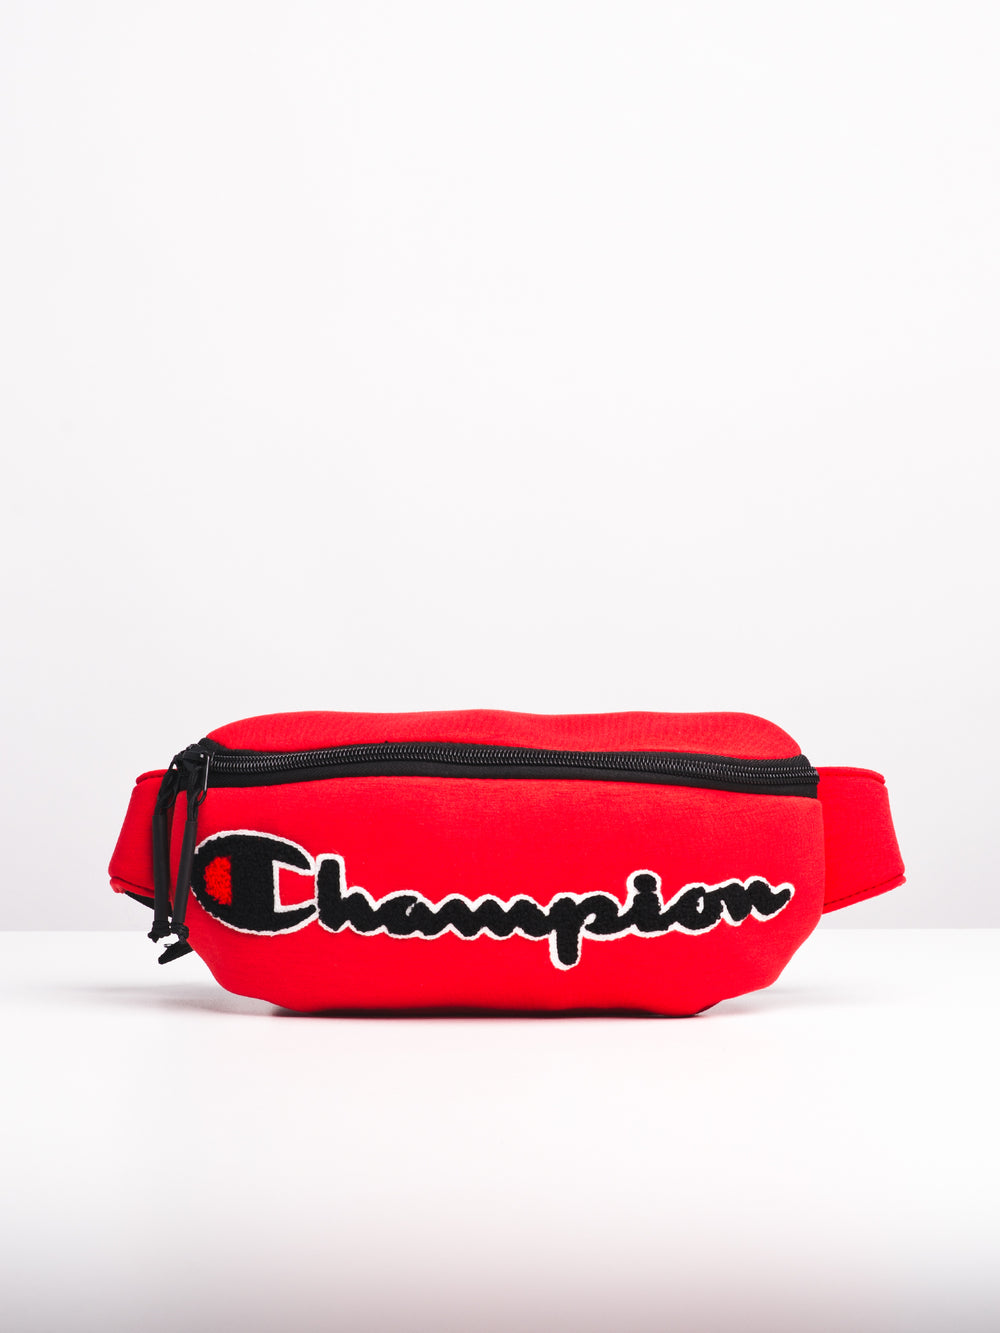 PRIME FANNY PACK WAISTPACK - RED - CLEARANCE